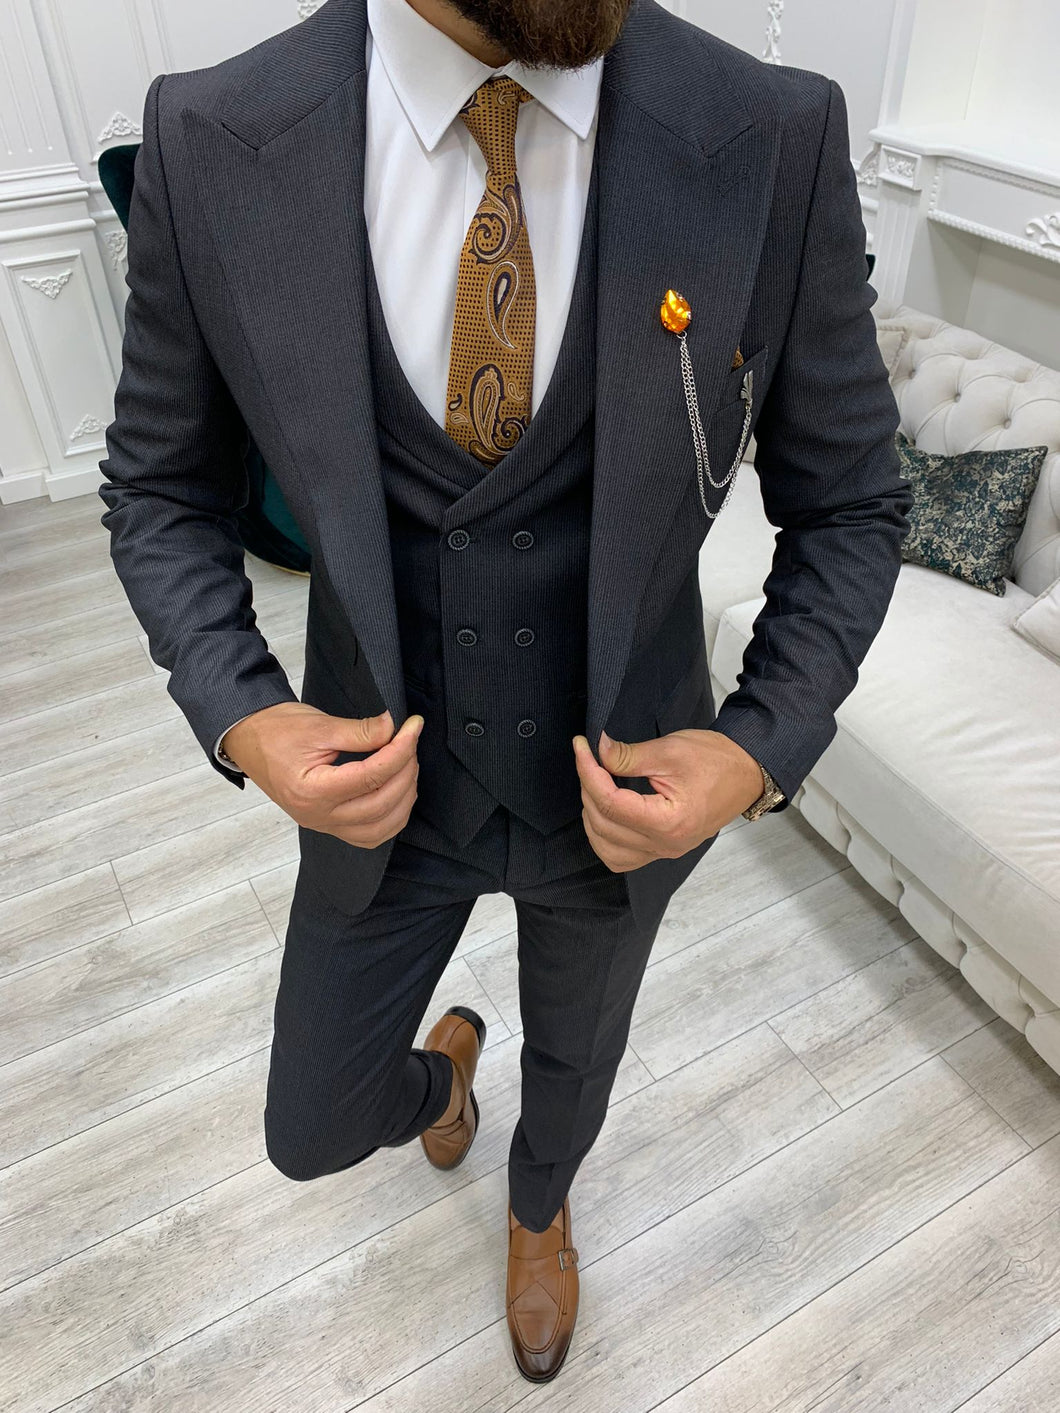 Chase Slim Fit Smoked Suit